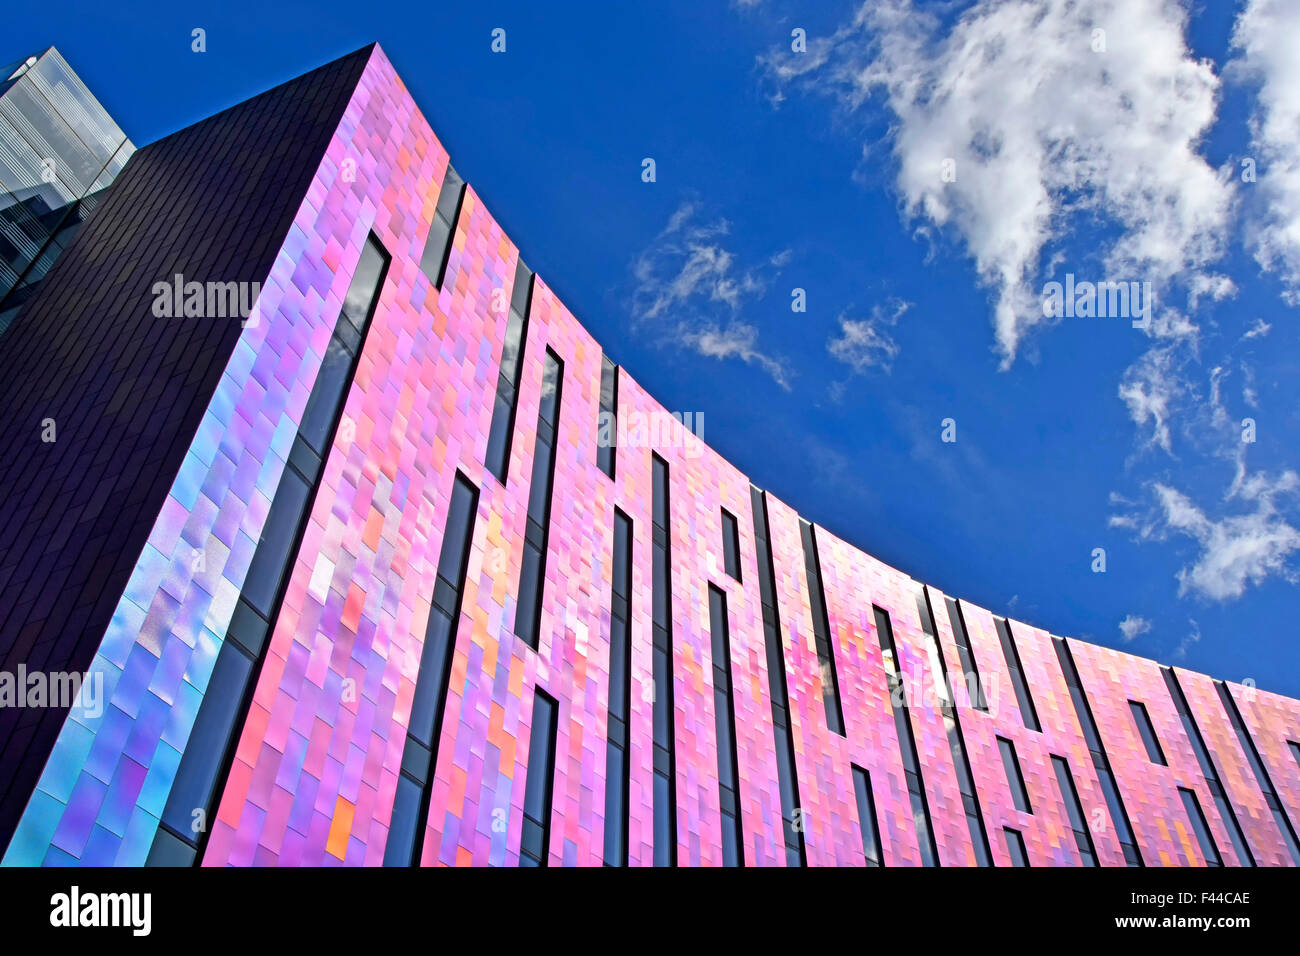 Abstract curved pattern colourful cladding and glazing panels reflecting light from bright sky on aloft W hotels building London Docklands England UK Stock Photo